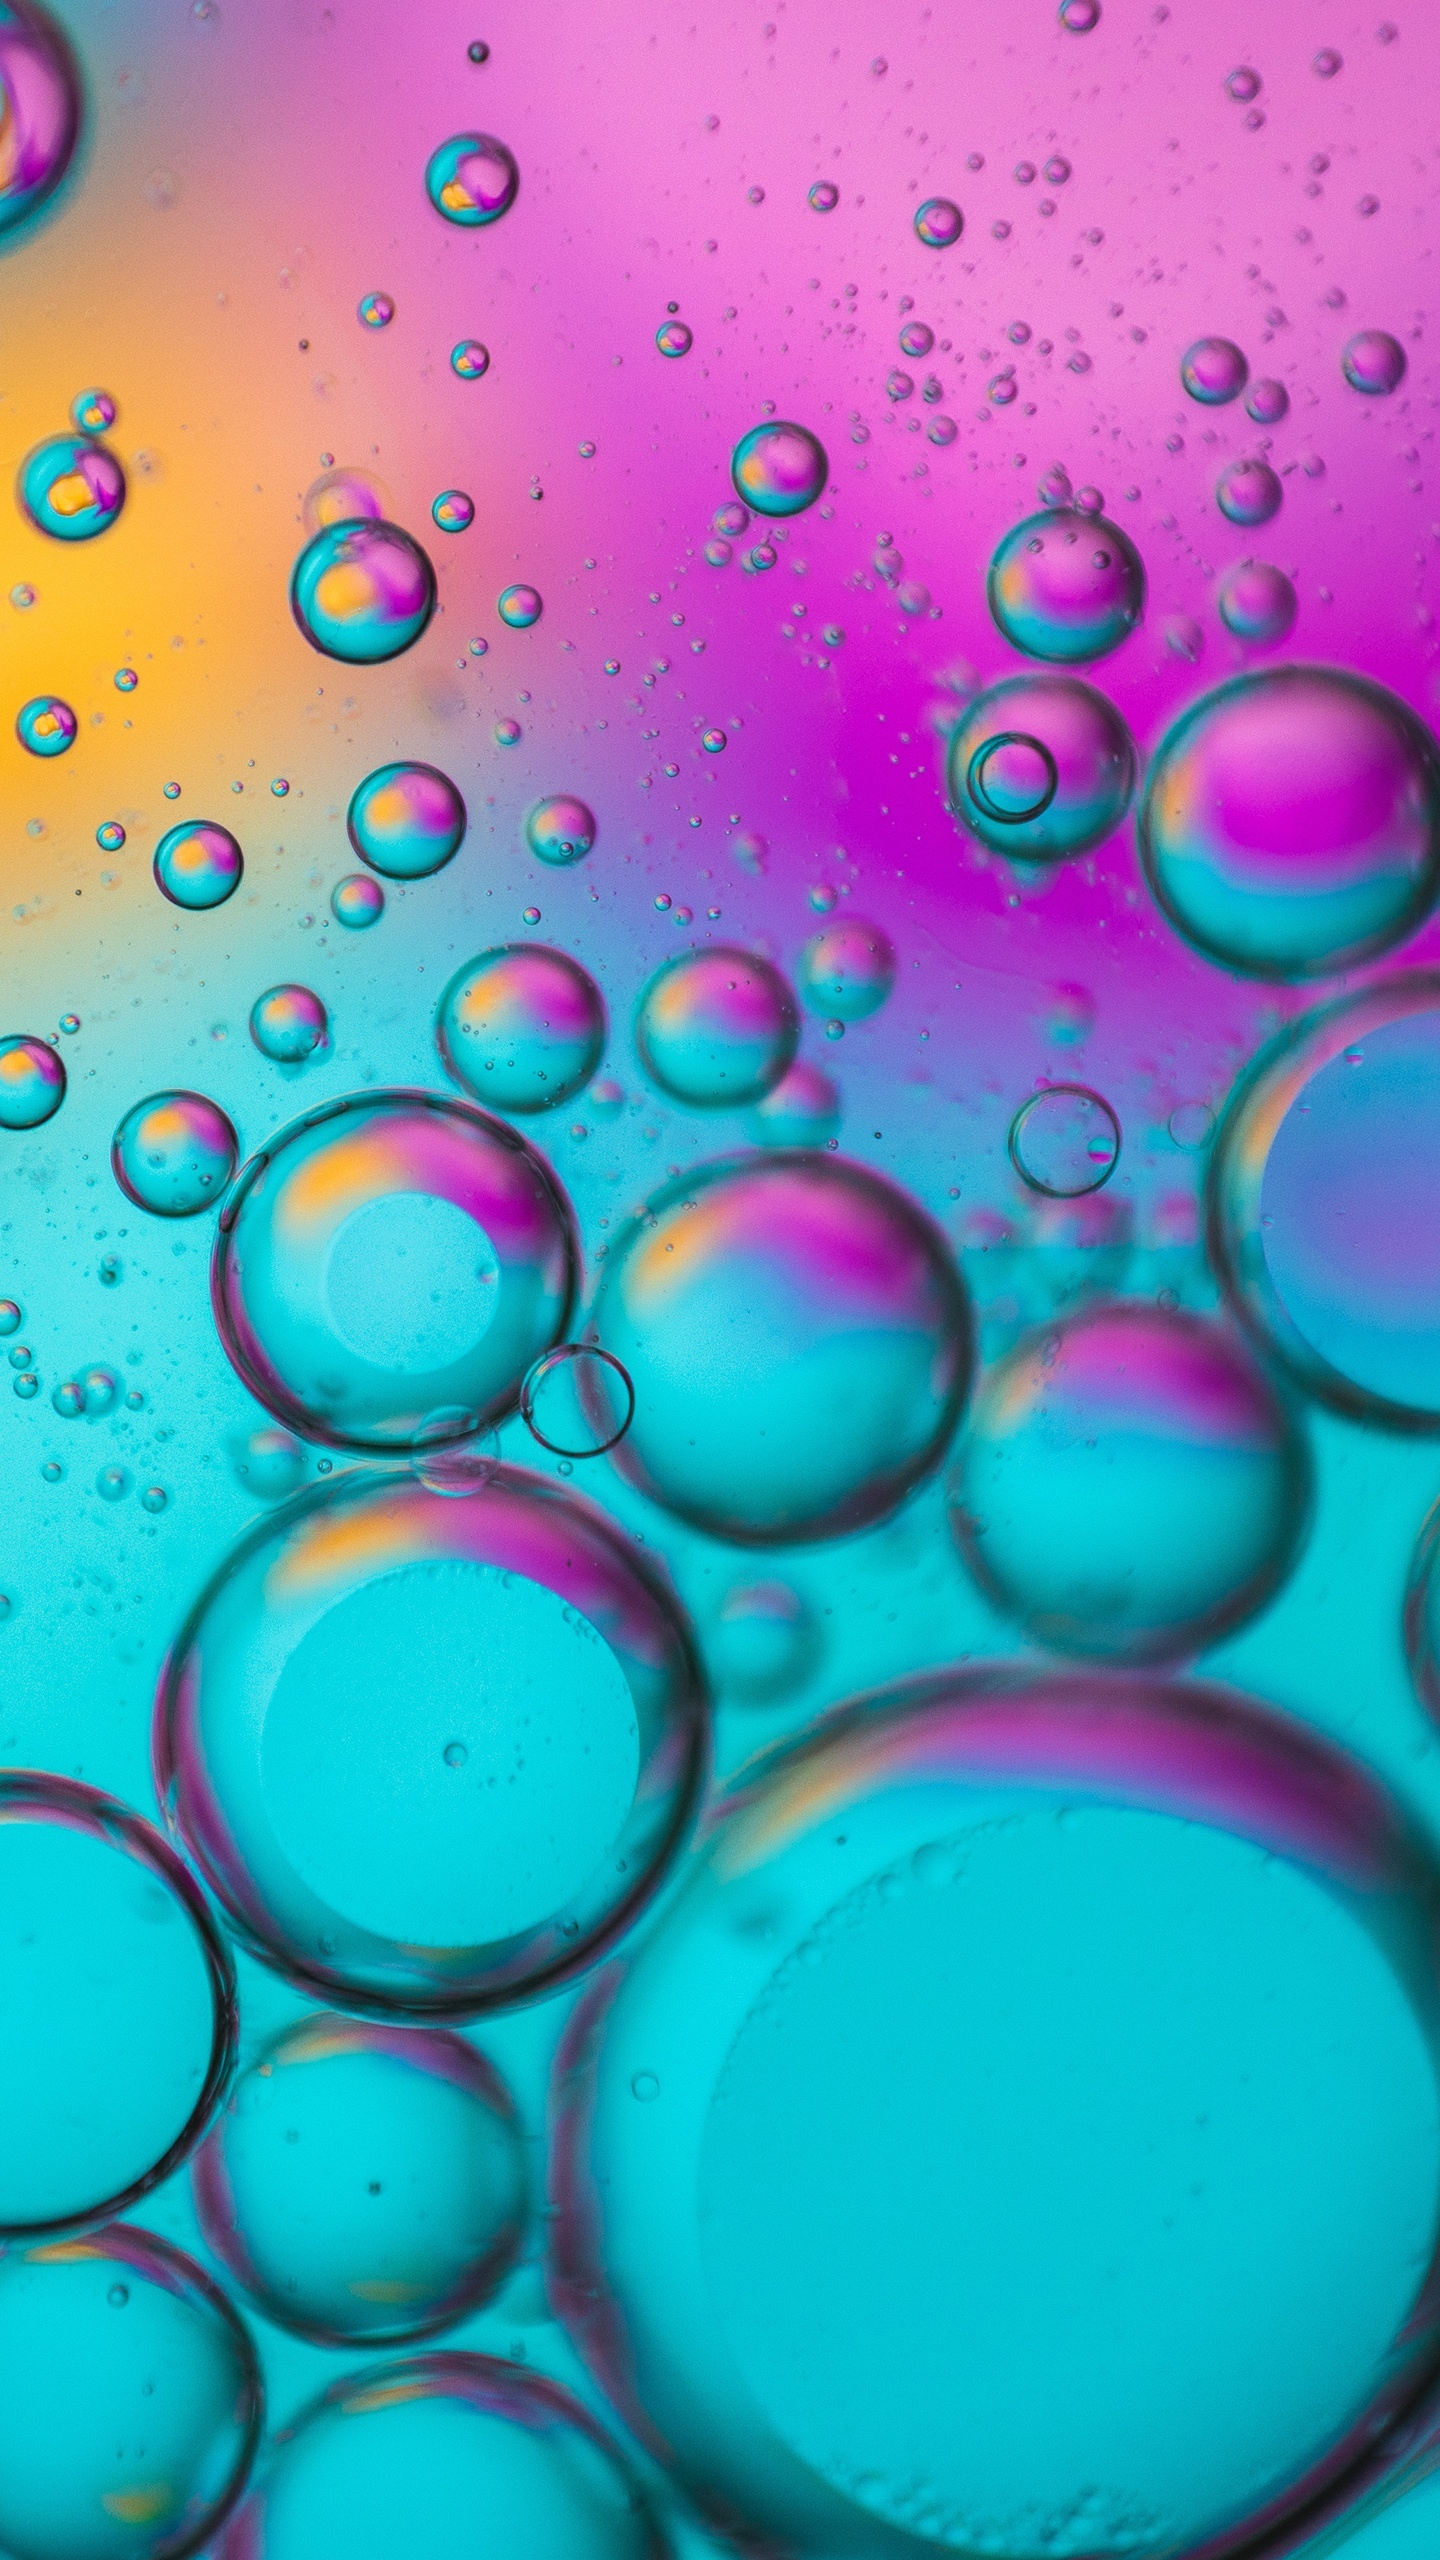 Bubbles wallpaper, Spectrum of colors, Abstract bubbles, Teal and pink gradients, Vivid bubble display, 1440x2560 HD Handy